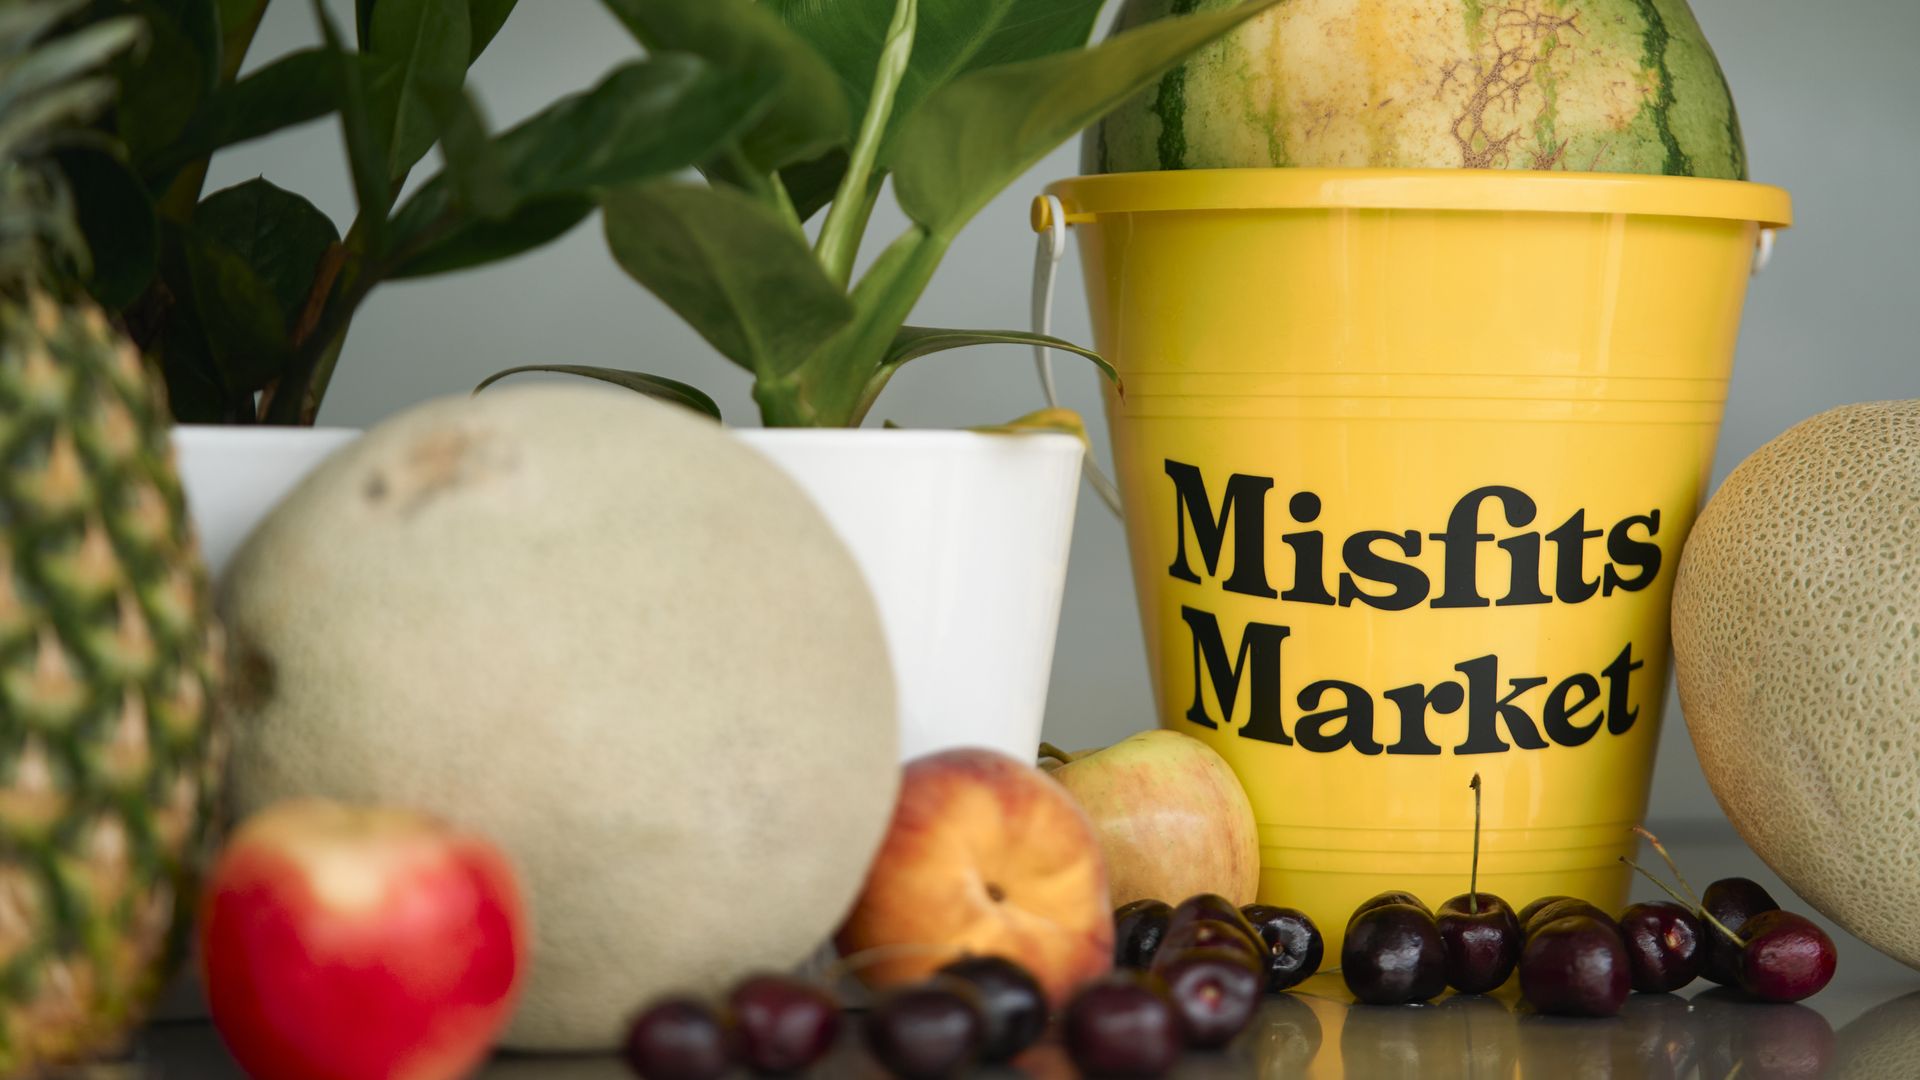 A yellow bucket with Misfits Markets spelled out in a dark lettering on it is surrounded by varying produce, including cherries, peaches and melons.